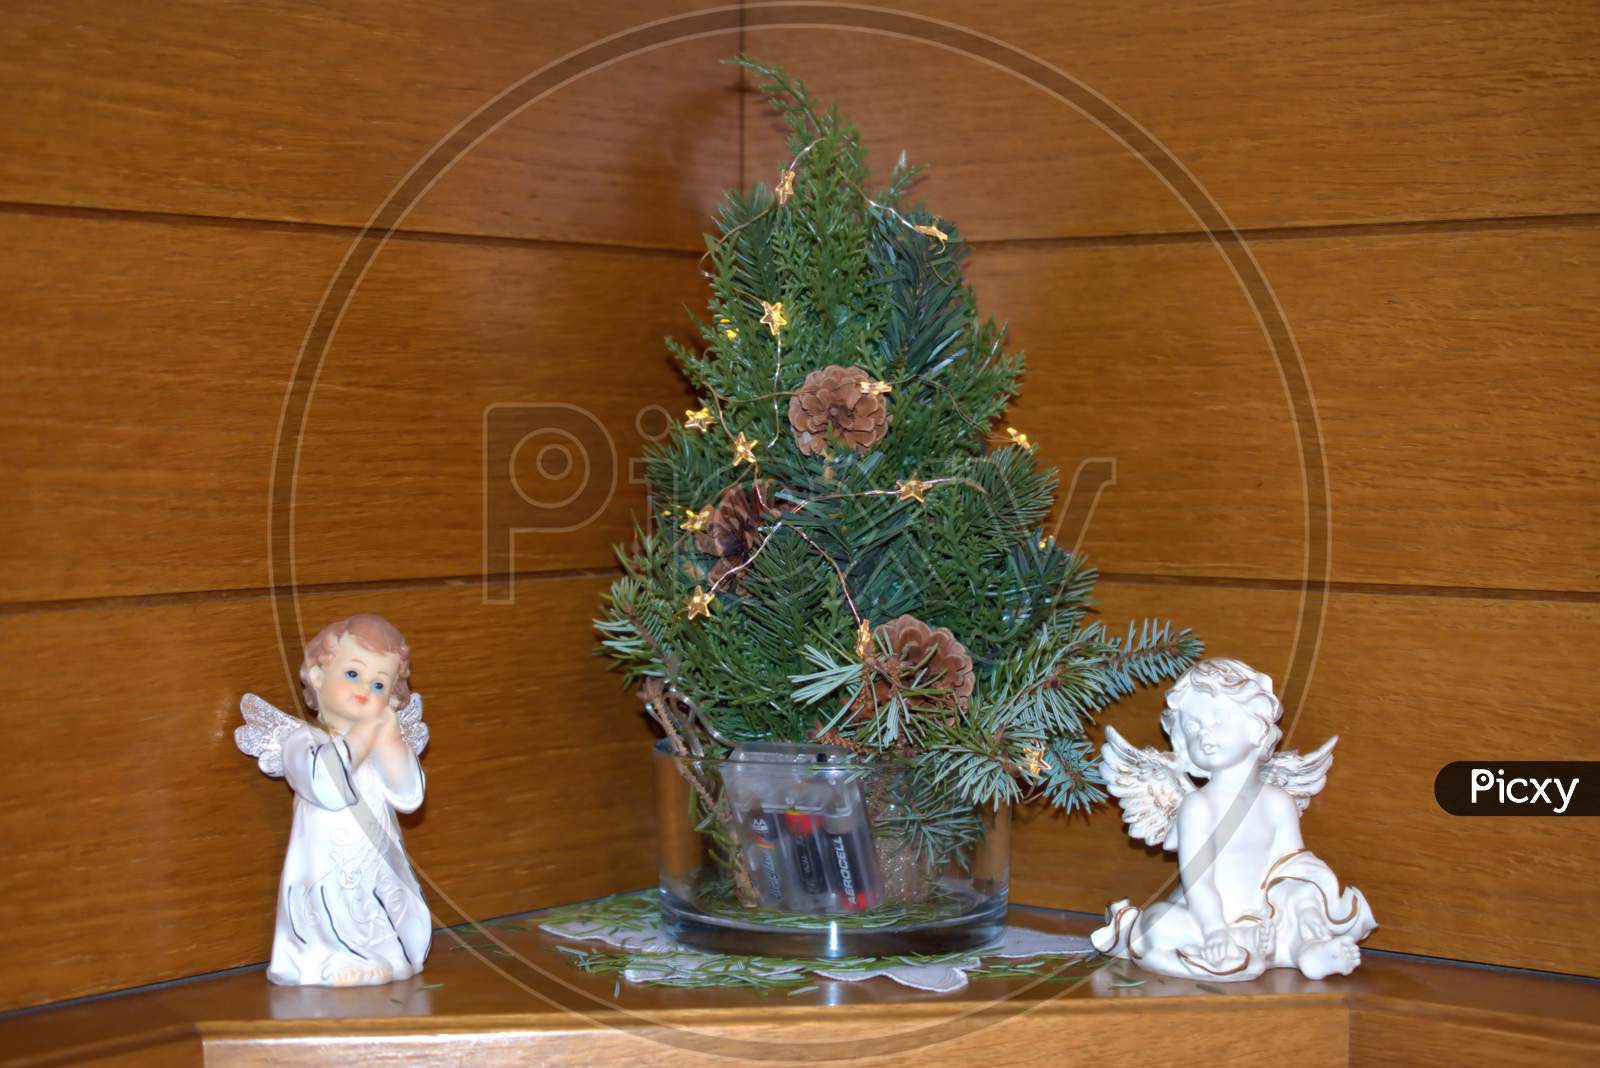 Angels And A Fir Tree For Christmas Decoration 21.12.2020